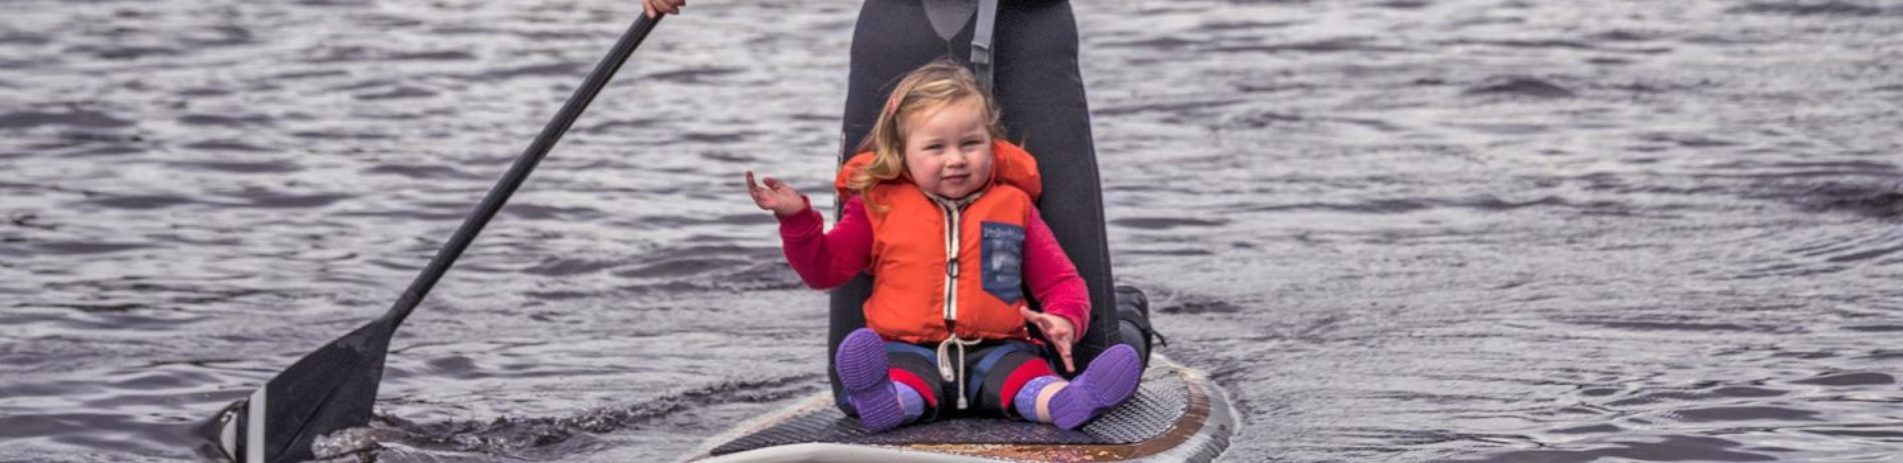 blonde-baby-girl-with-small-life-vest-sitting-on-paddleboard-and-waving-with-mums-legs-just-visible-behind-her-and-an-oar-on-the-left